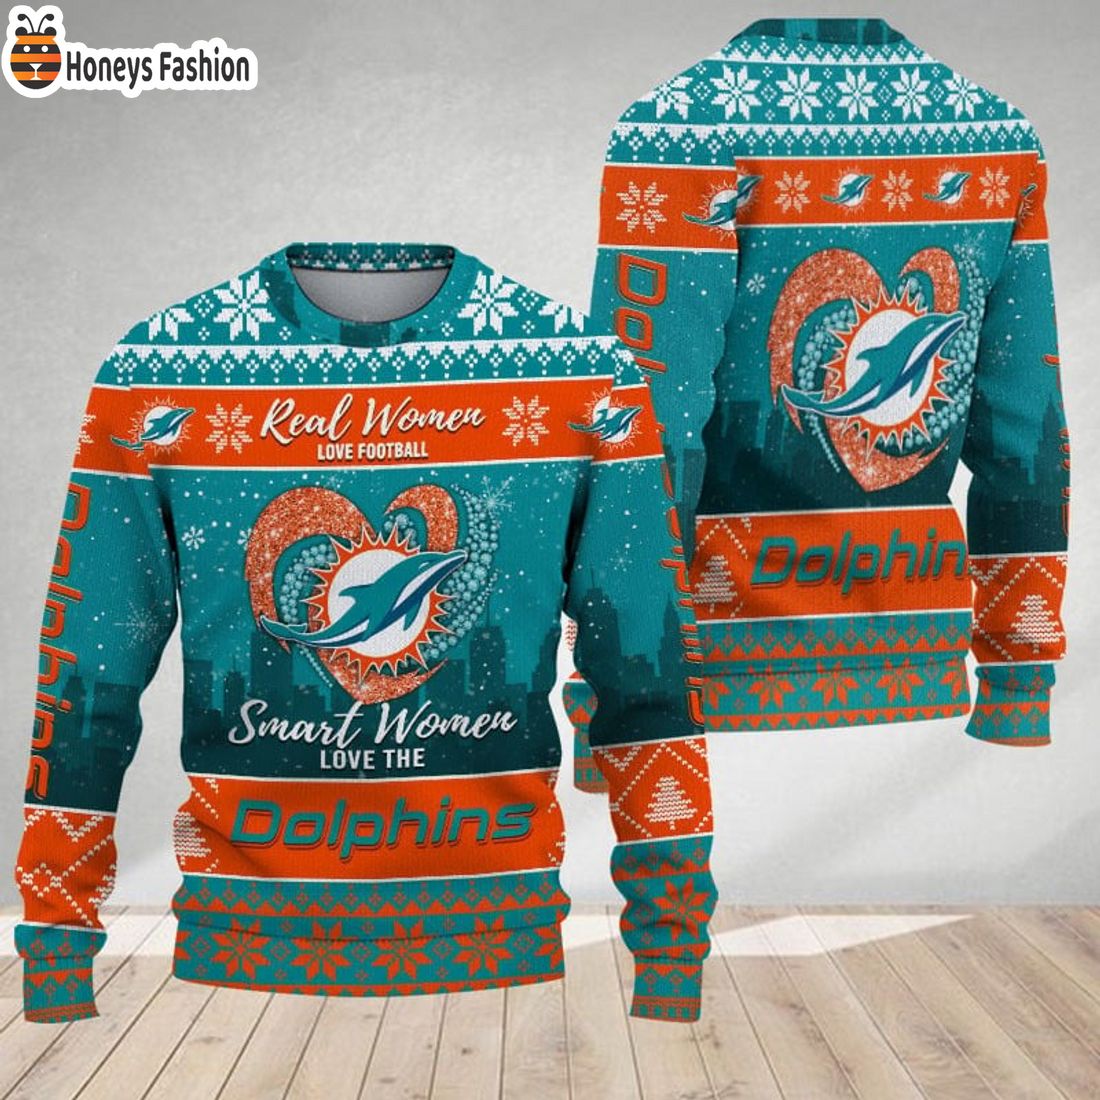 Miami Dolphins Smart Women Love The Dolphins Ugly Christmas Sweater